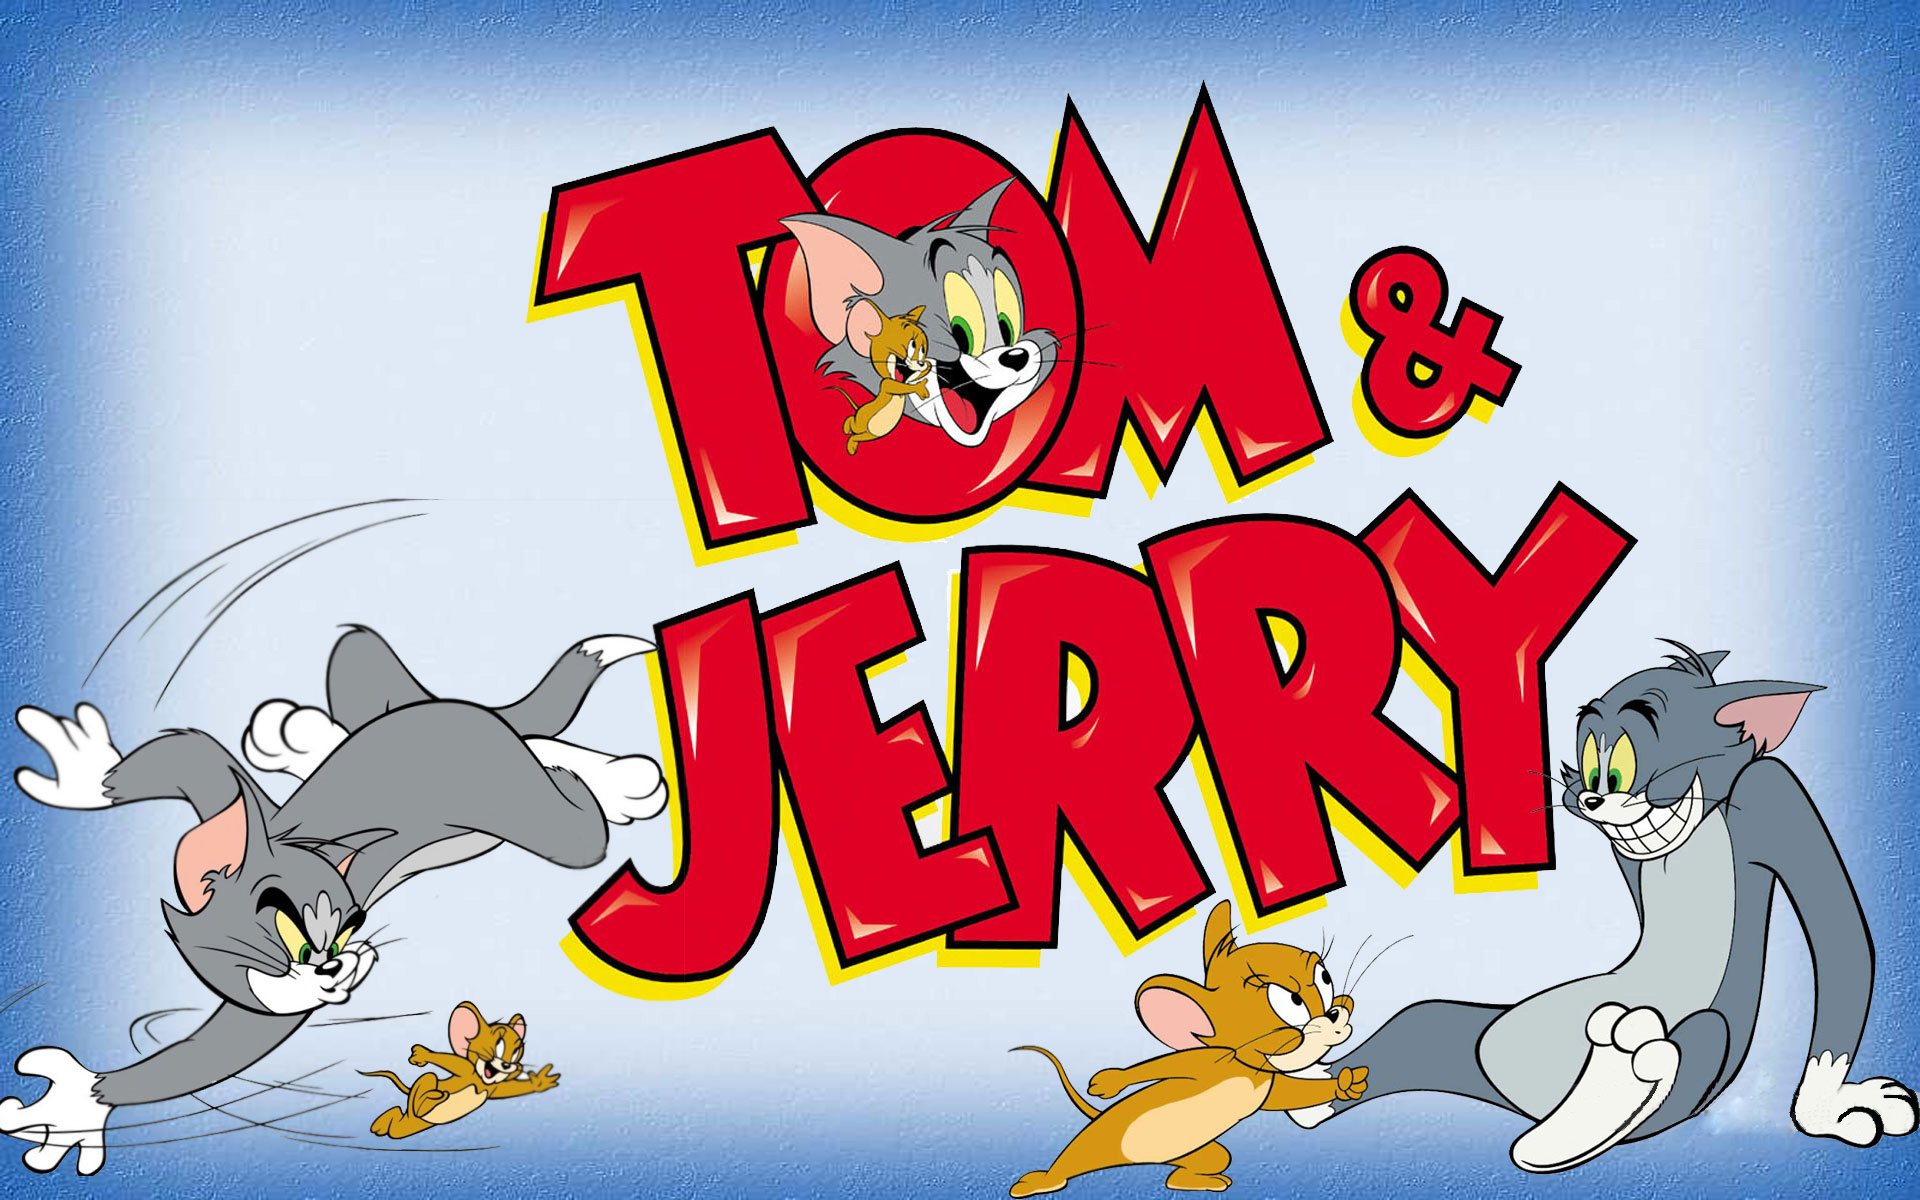 Tom And Jerry Hd Wallpaper Download 1920x1200 : Wallpapers13.com